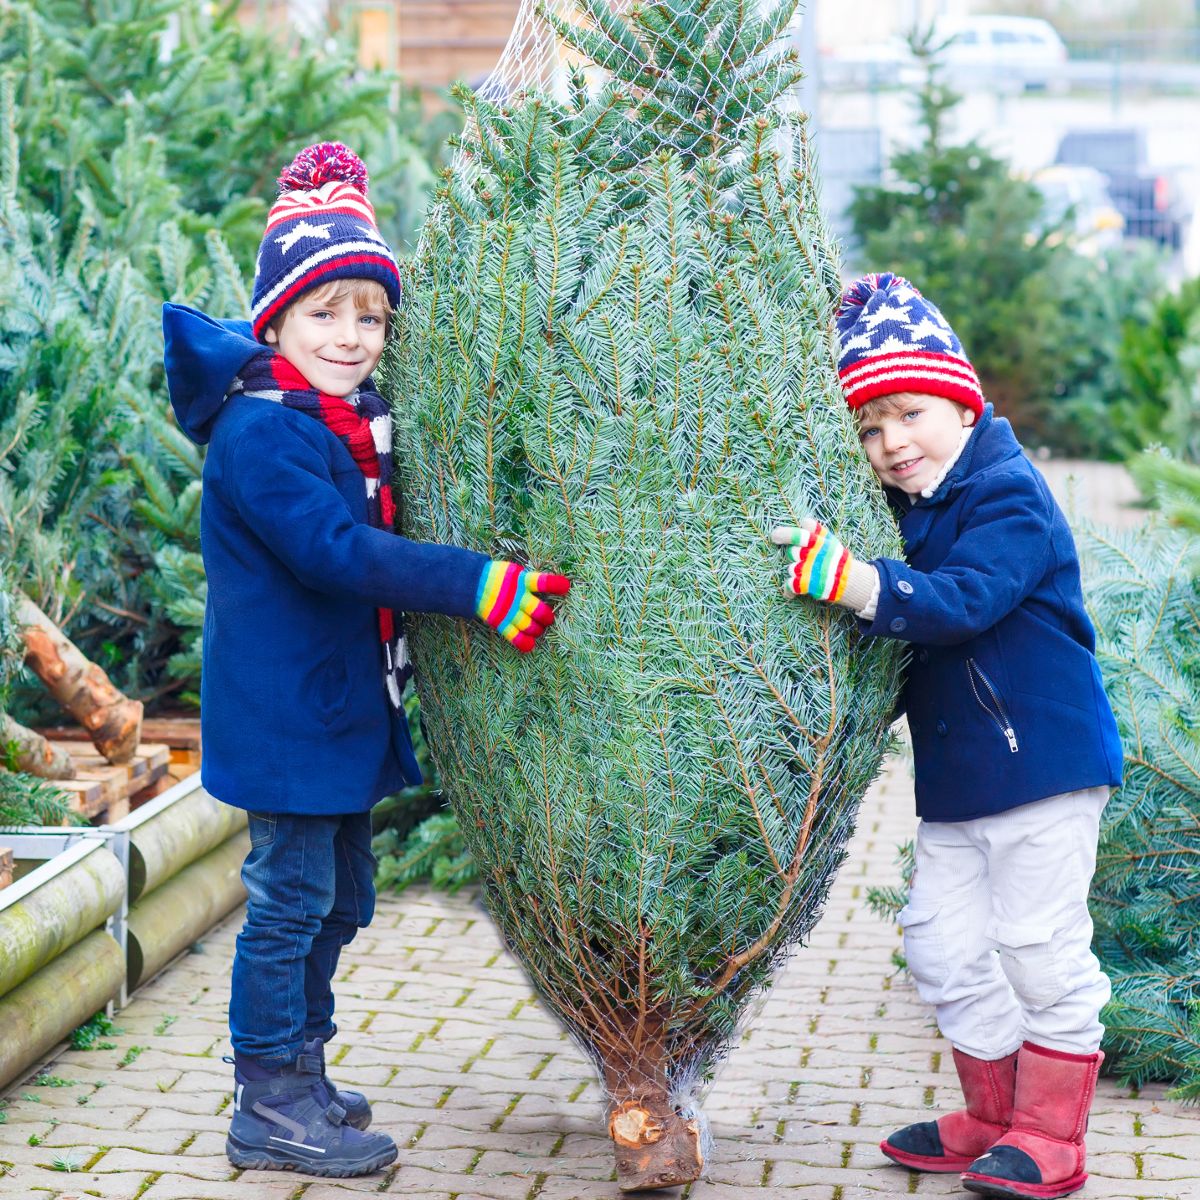 When To Buy A Christmas Tree?